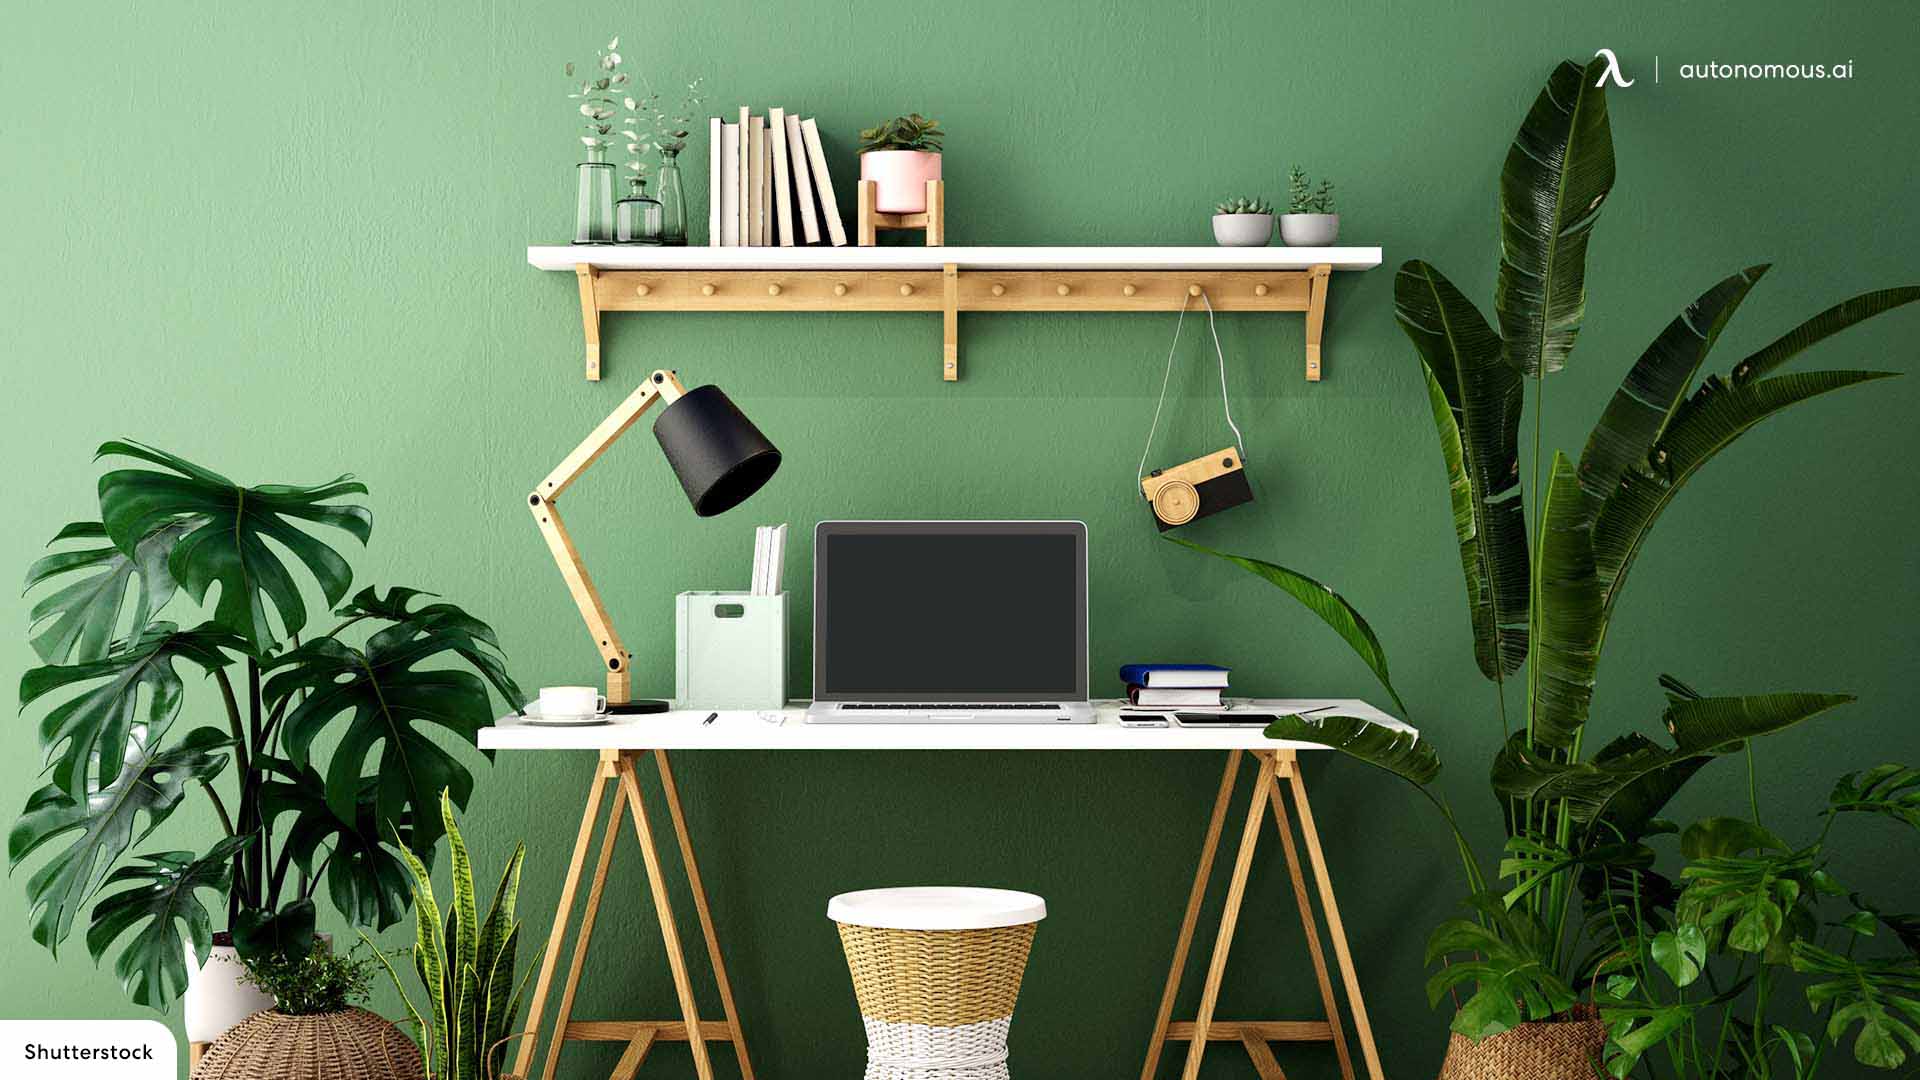 Adding Some Greenery to successful home office